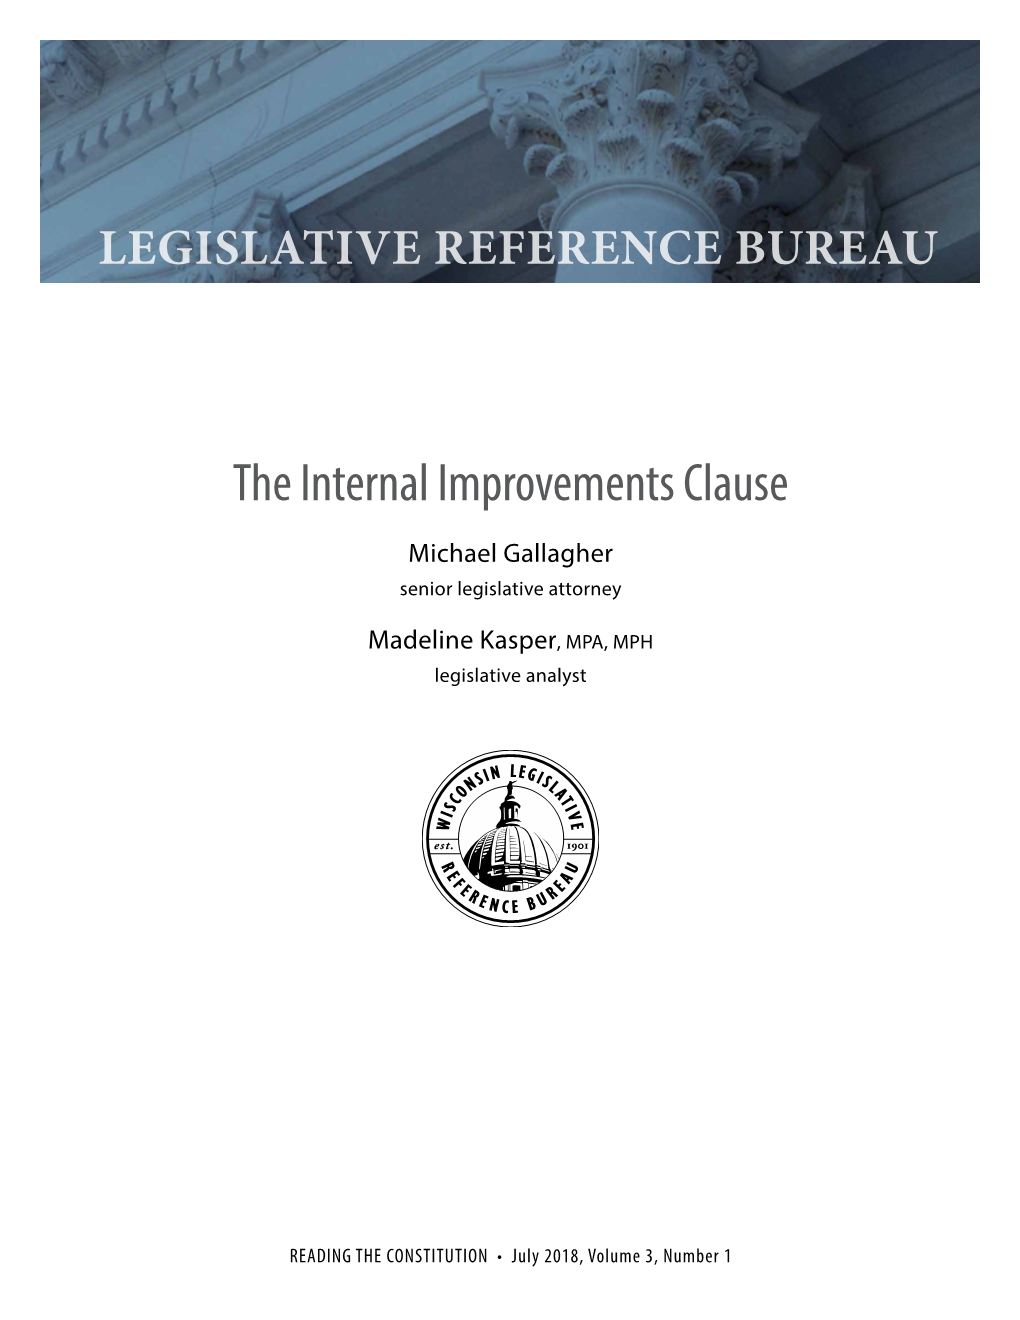 The Internal Improvements Clause